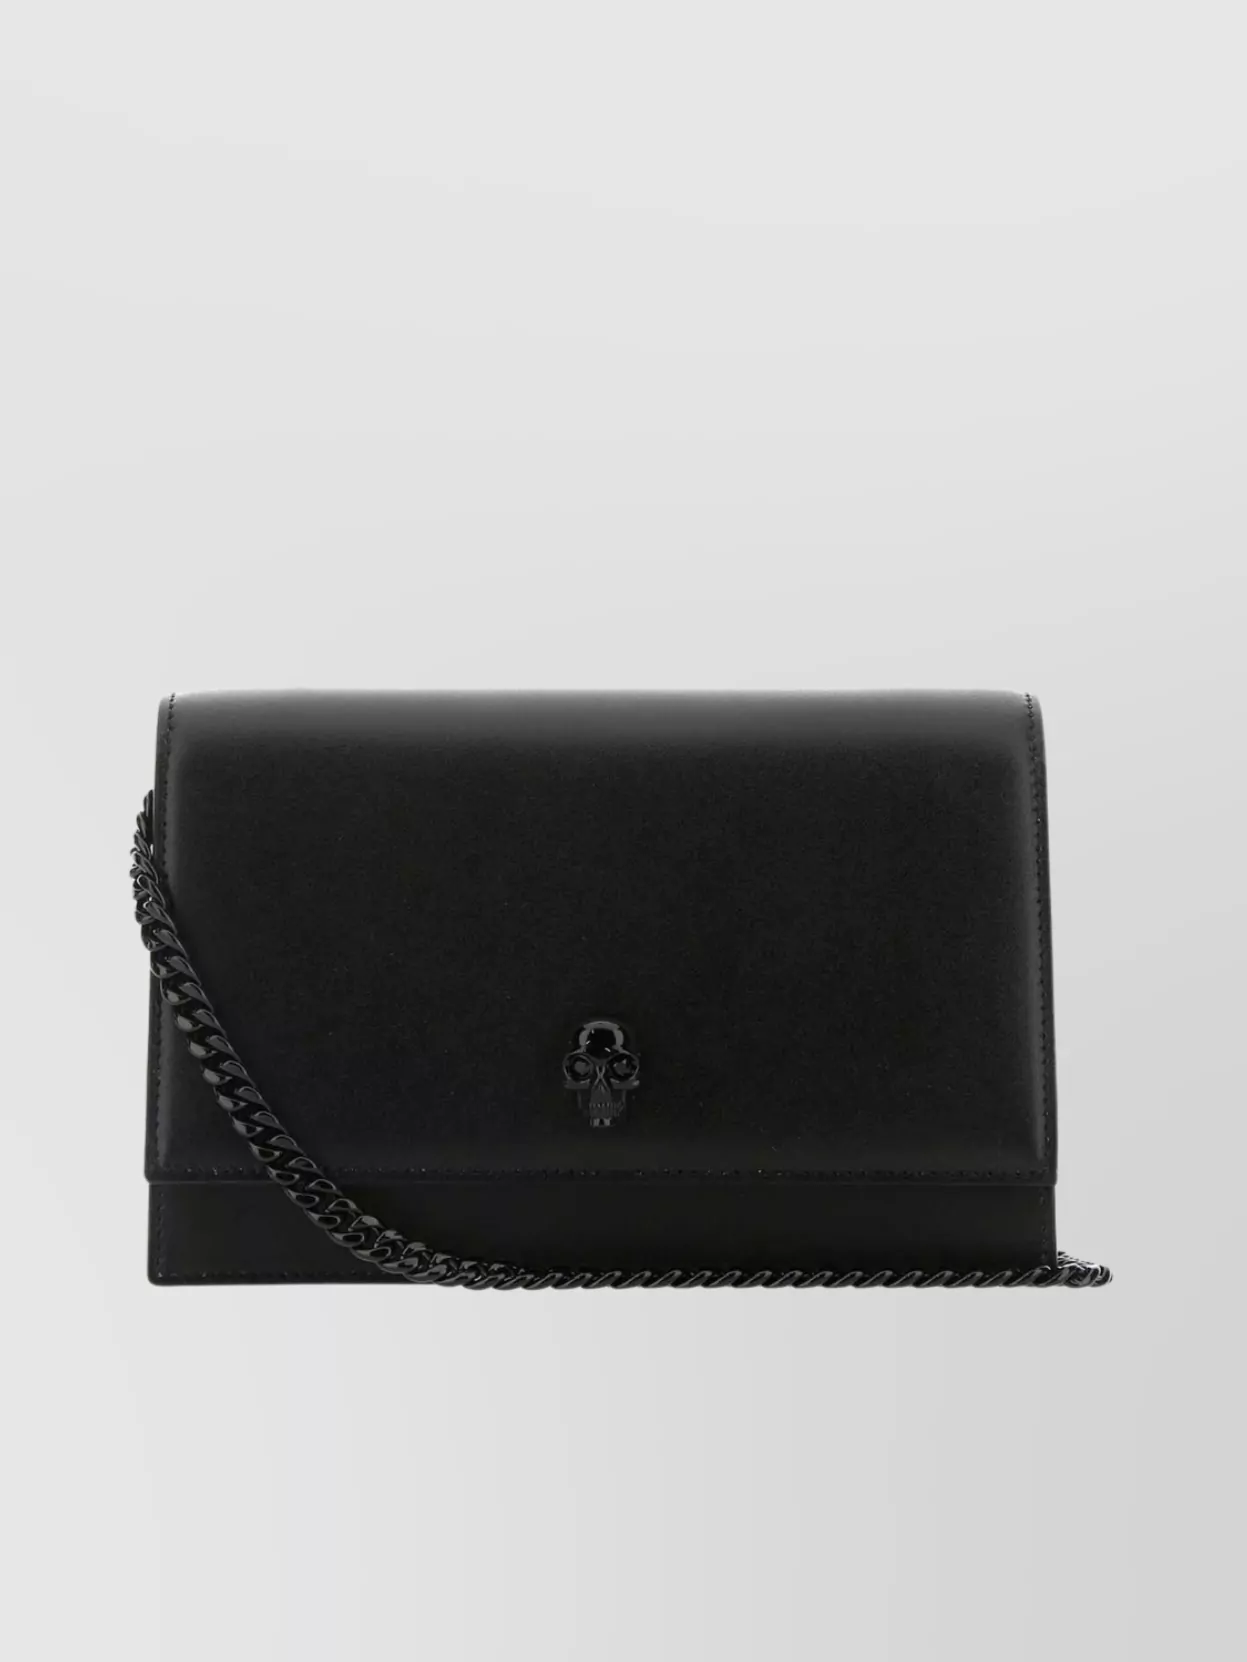 ALEXANDER MCQUEEN MINI SKULL CLUTCH WITH CHAIN STRAP AND FOLD-OVER FLAP